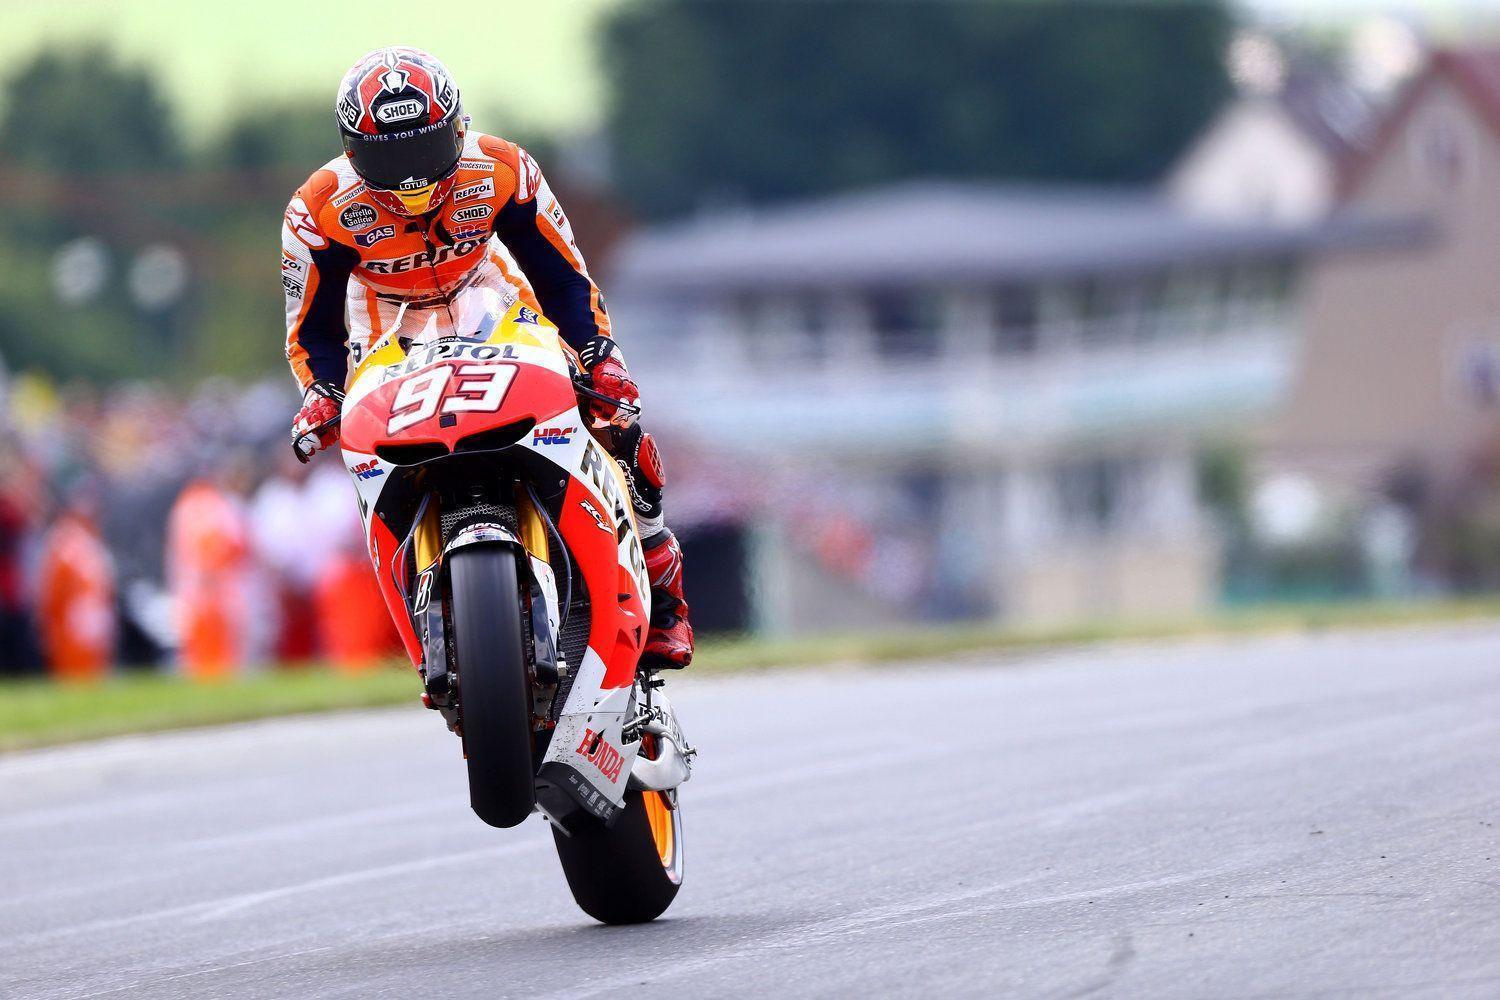 Marc marquez, Wallpaper and Sports